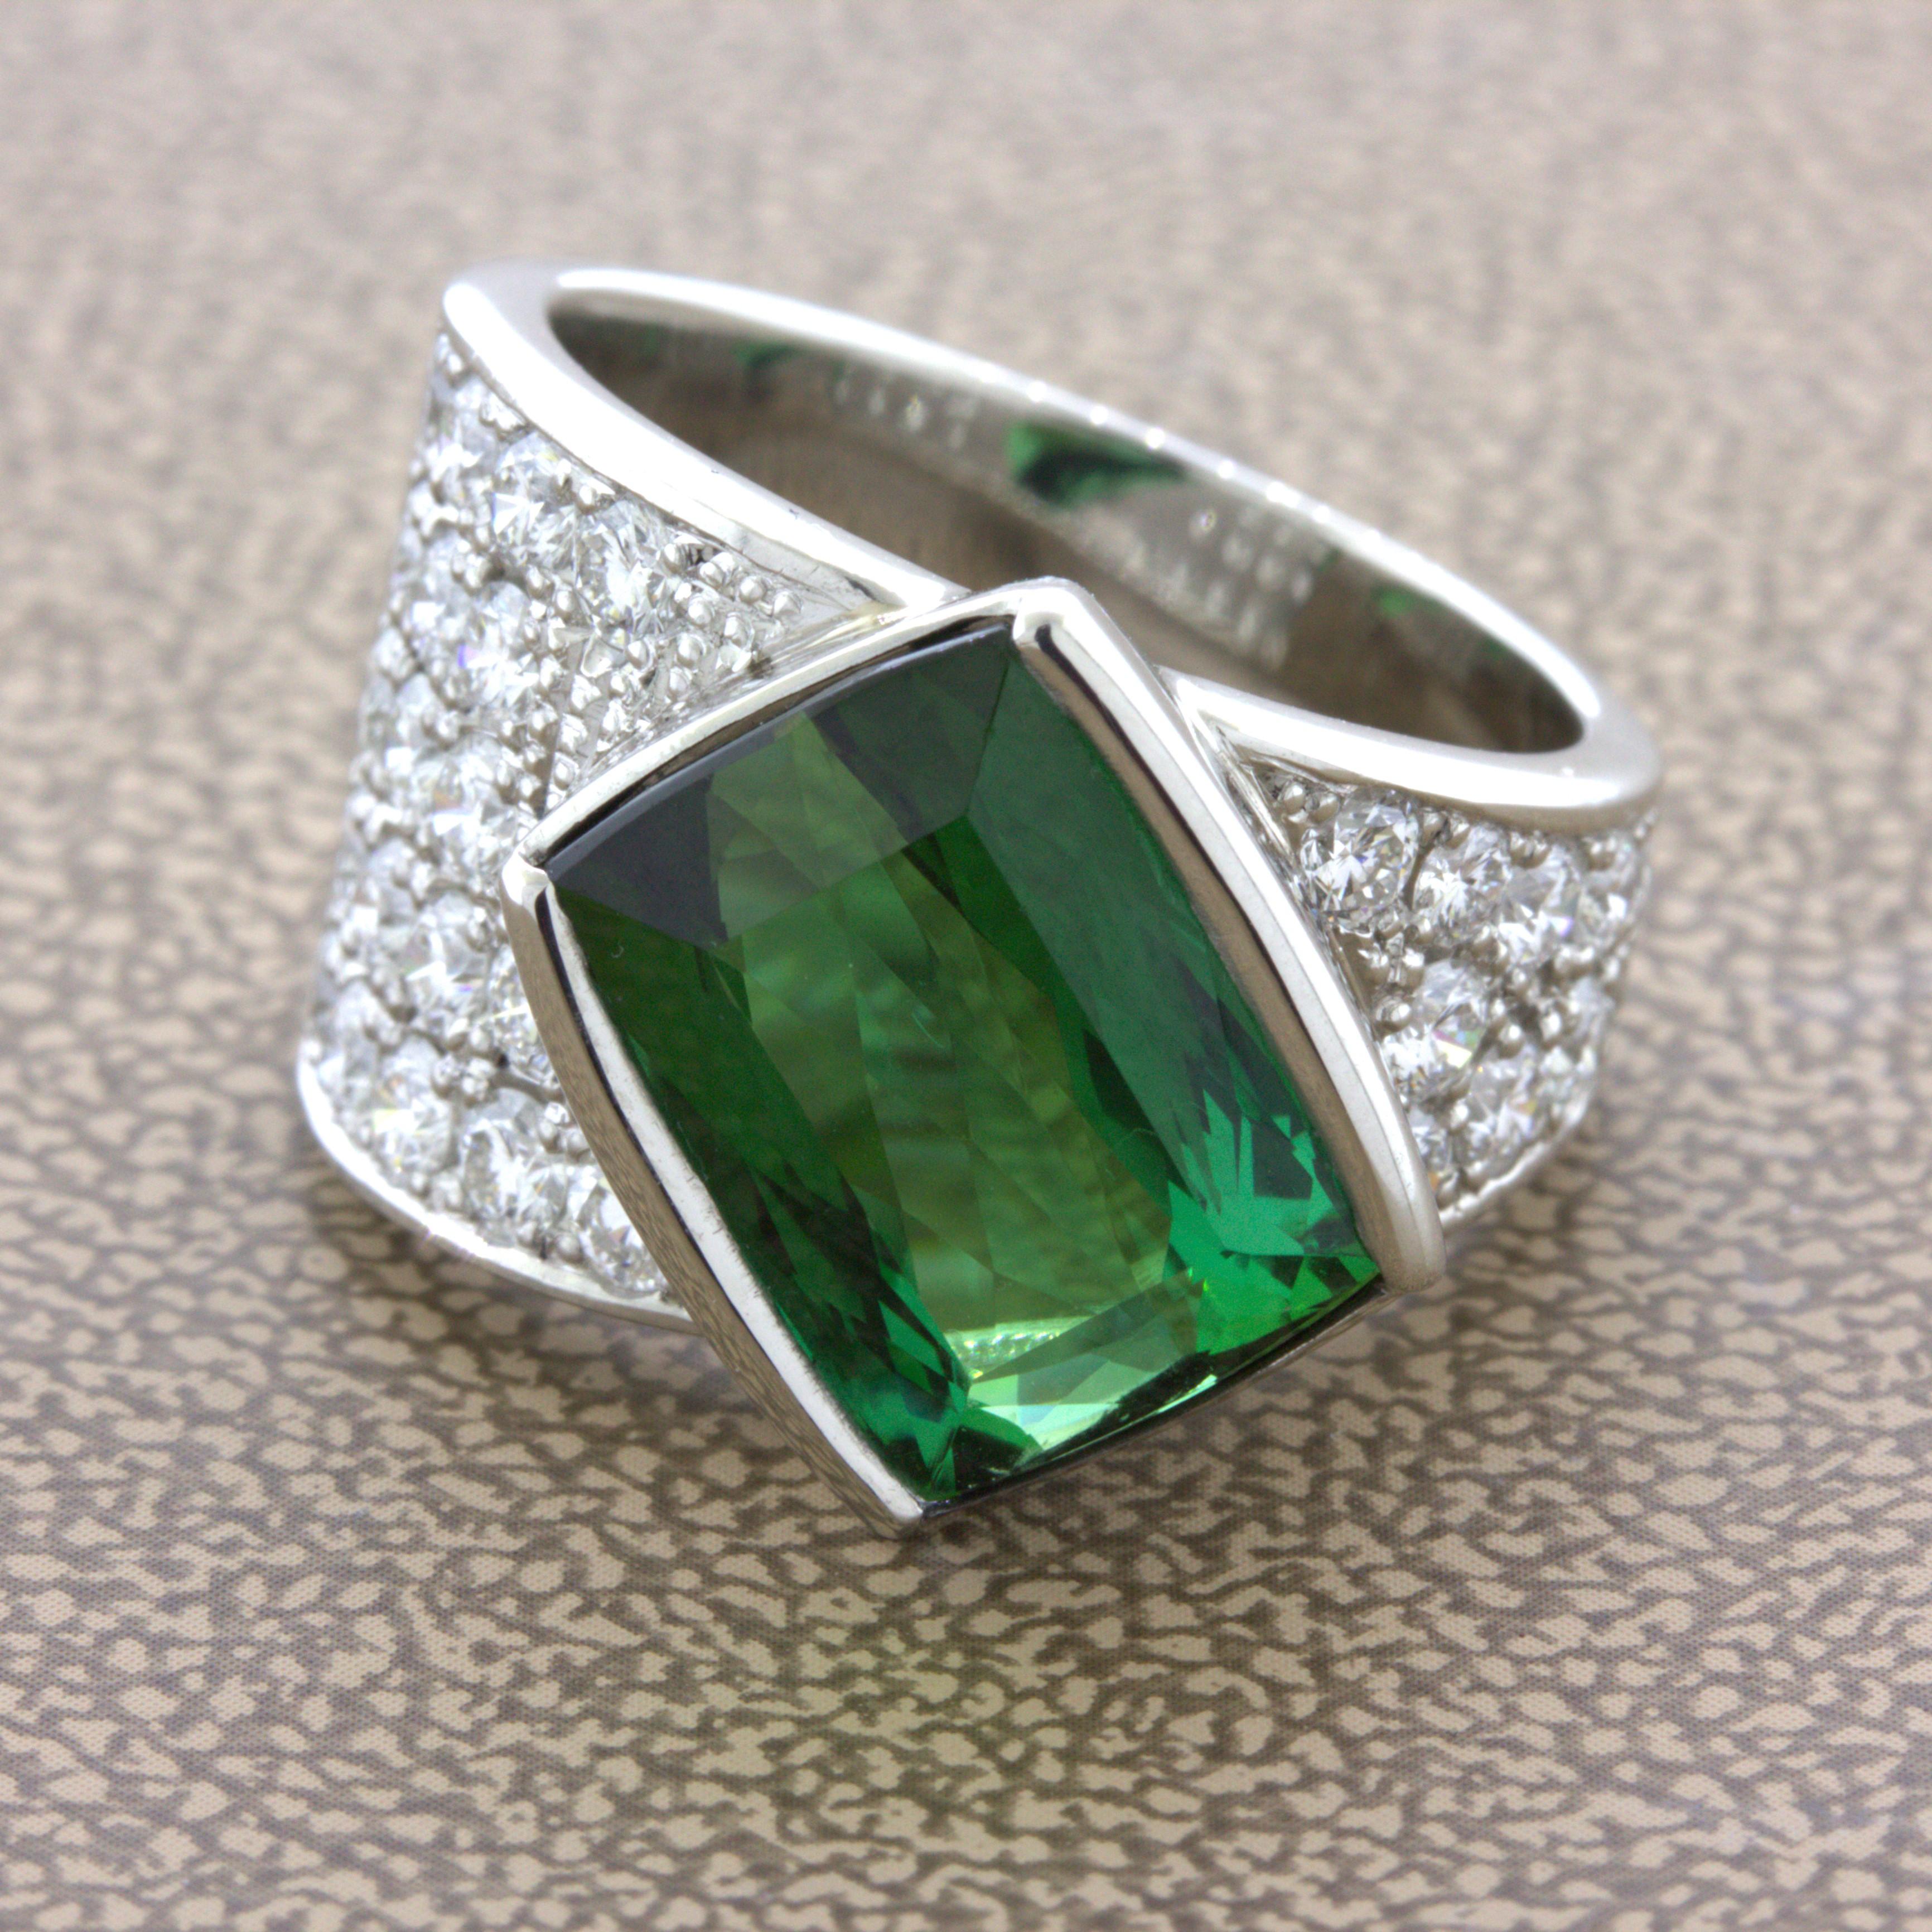 A sweet and fine tourmaline takes center stage! It has a lovely vibrant bluish-green color that radiates in the light and weighs 5.44 carats. It is complemented by 1.35 carats of round brilliant-cut diamonds set on its sides. Hand-fabricated in